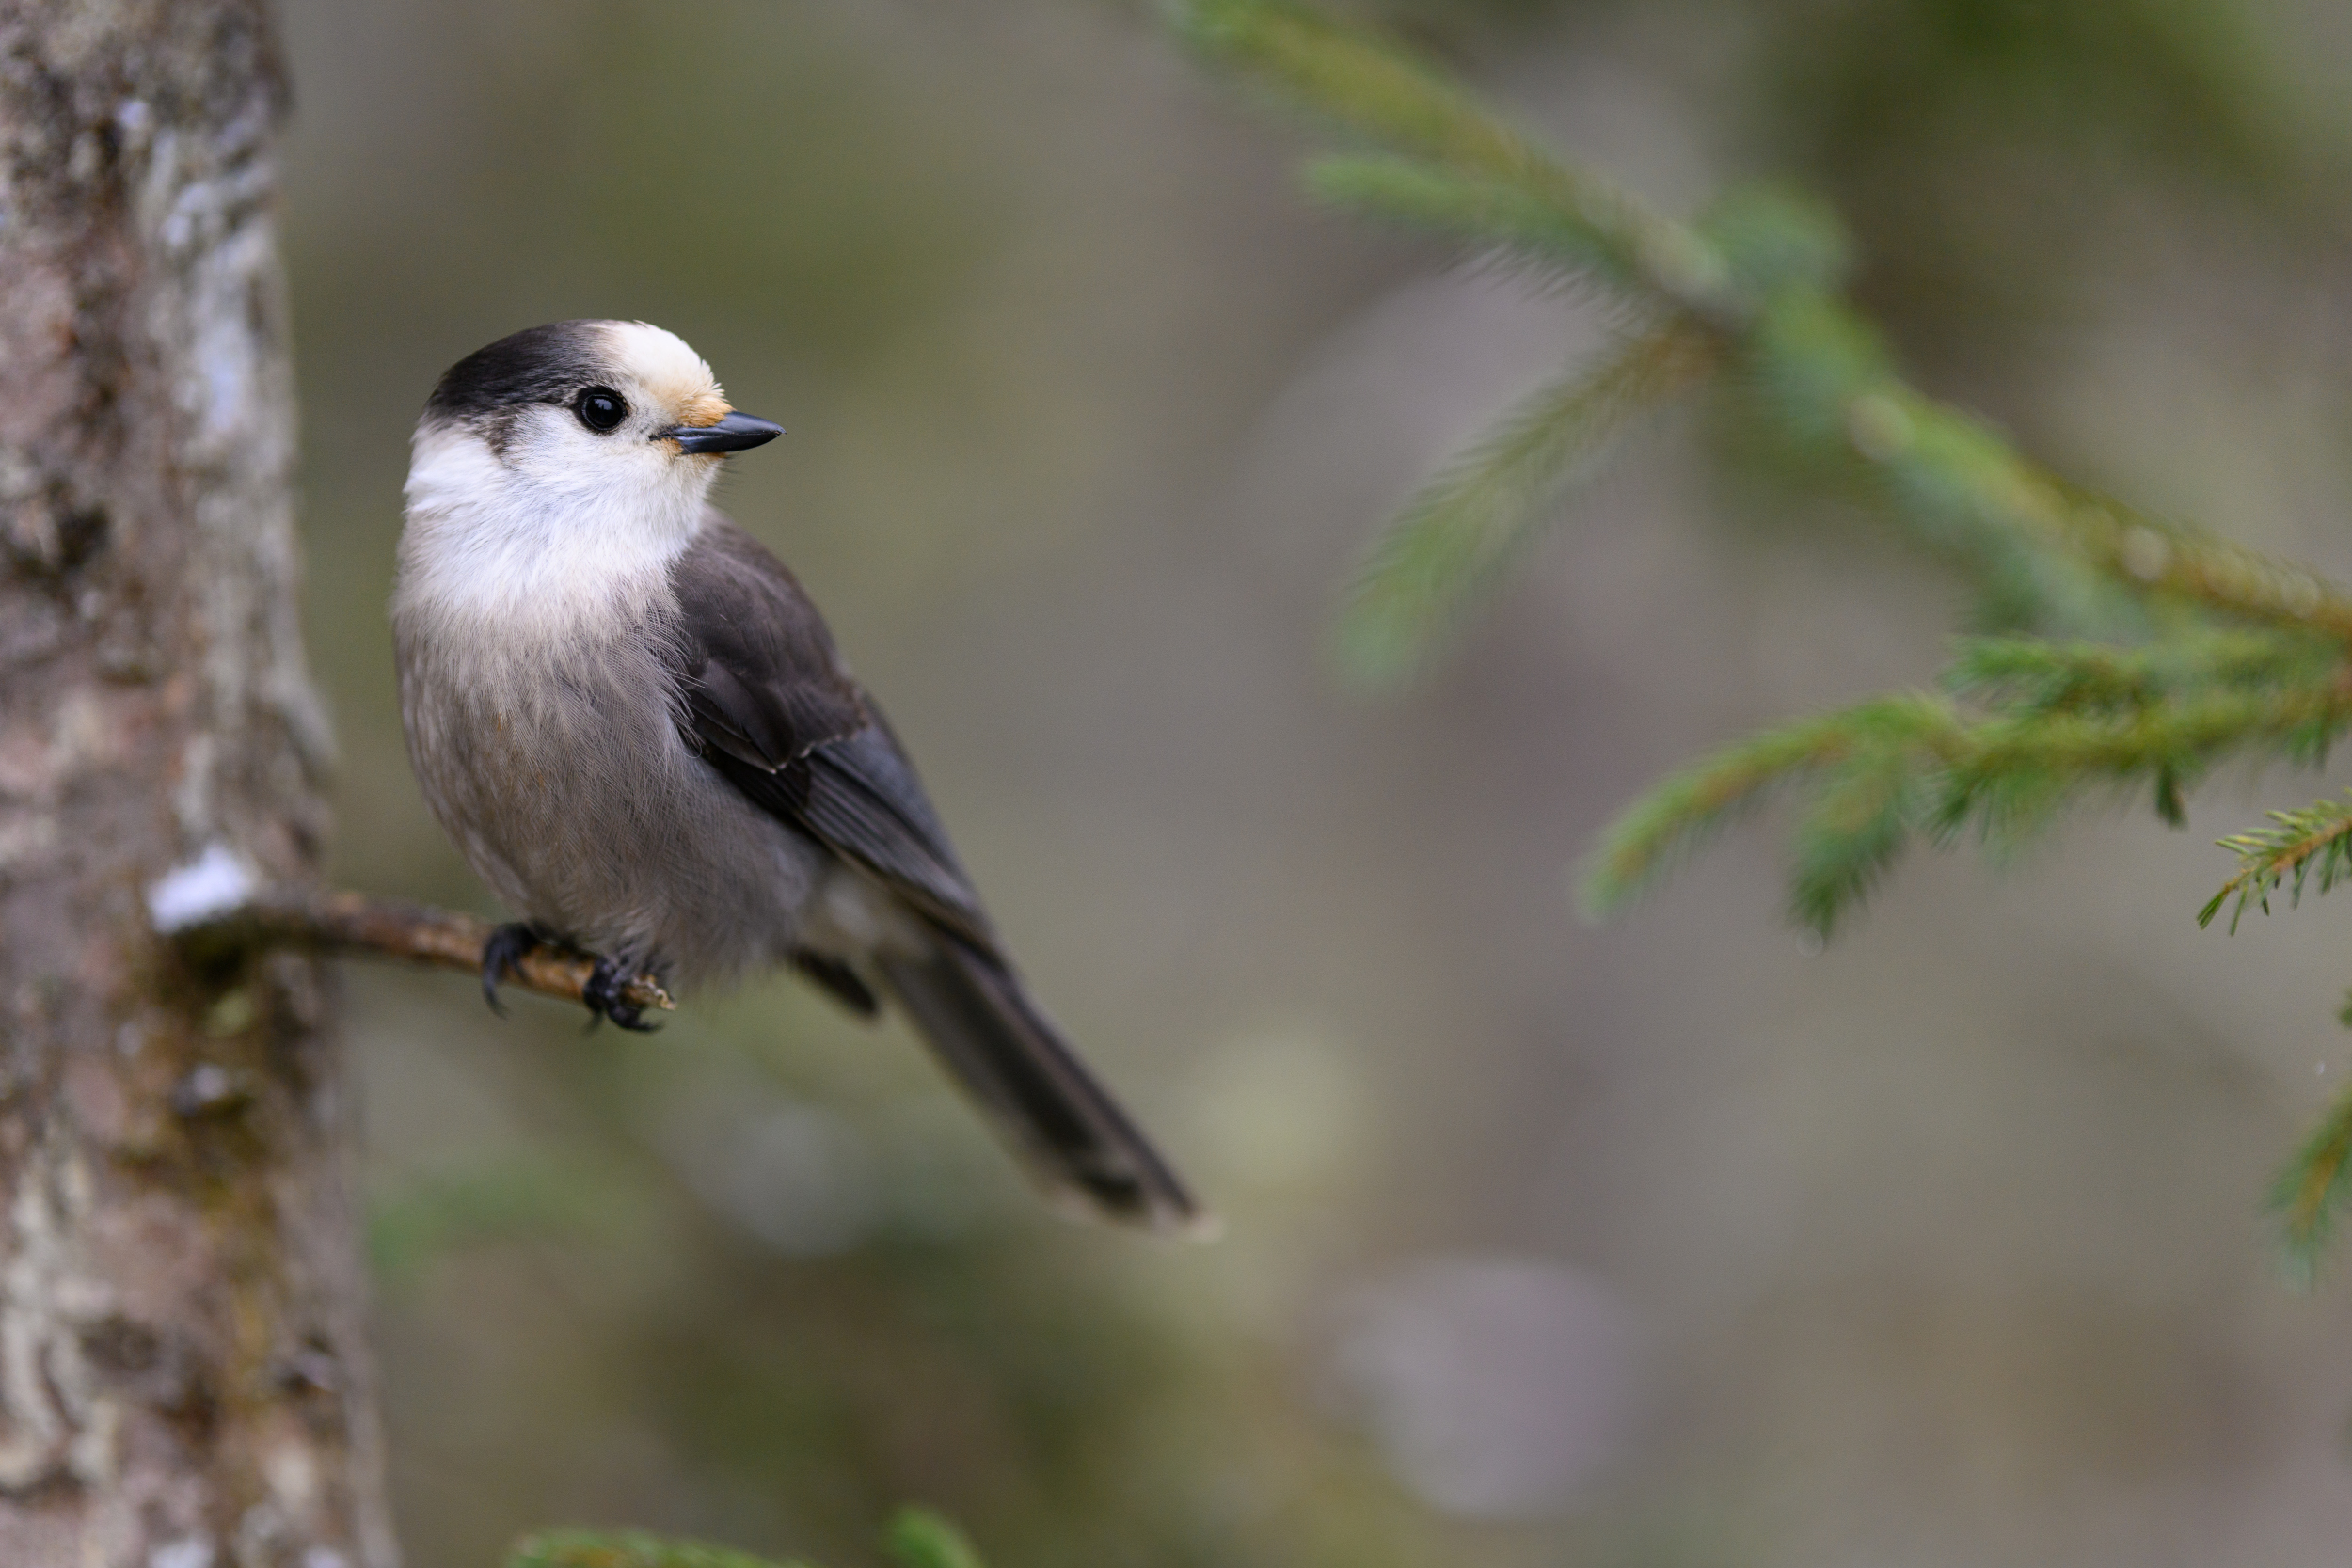 a canada jay - a white and gray bird with a round head and body, large black eyes, and a long tail - sits nicely perched on a small branch on the edge of a tree. the rest of the scene is out of focus, blurred by my proximity to the friendly bird and me using a 105mm f1.4 lens.